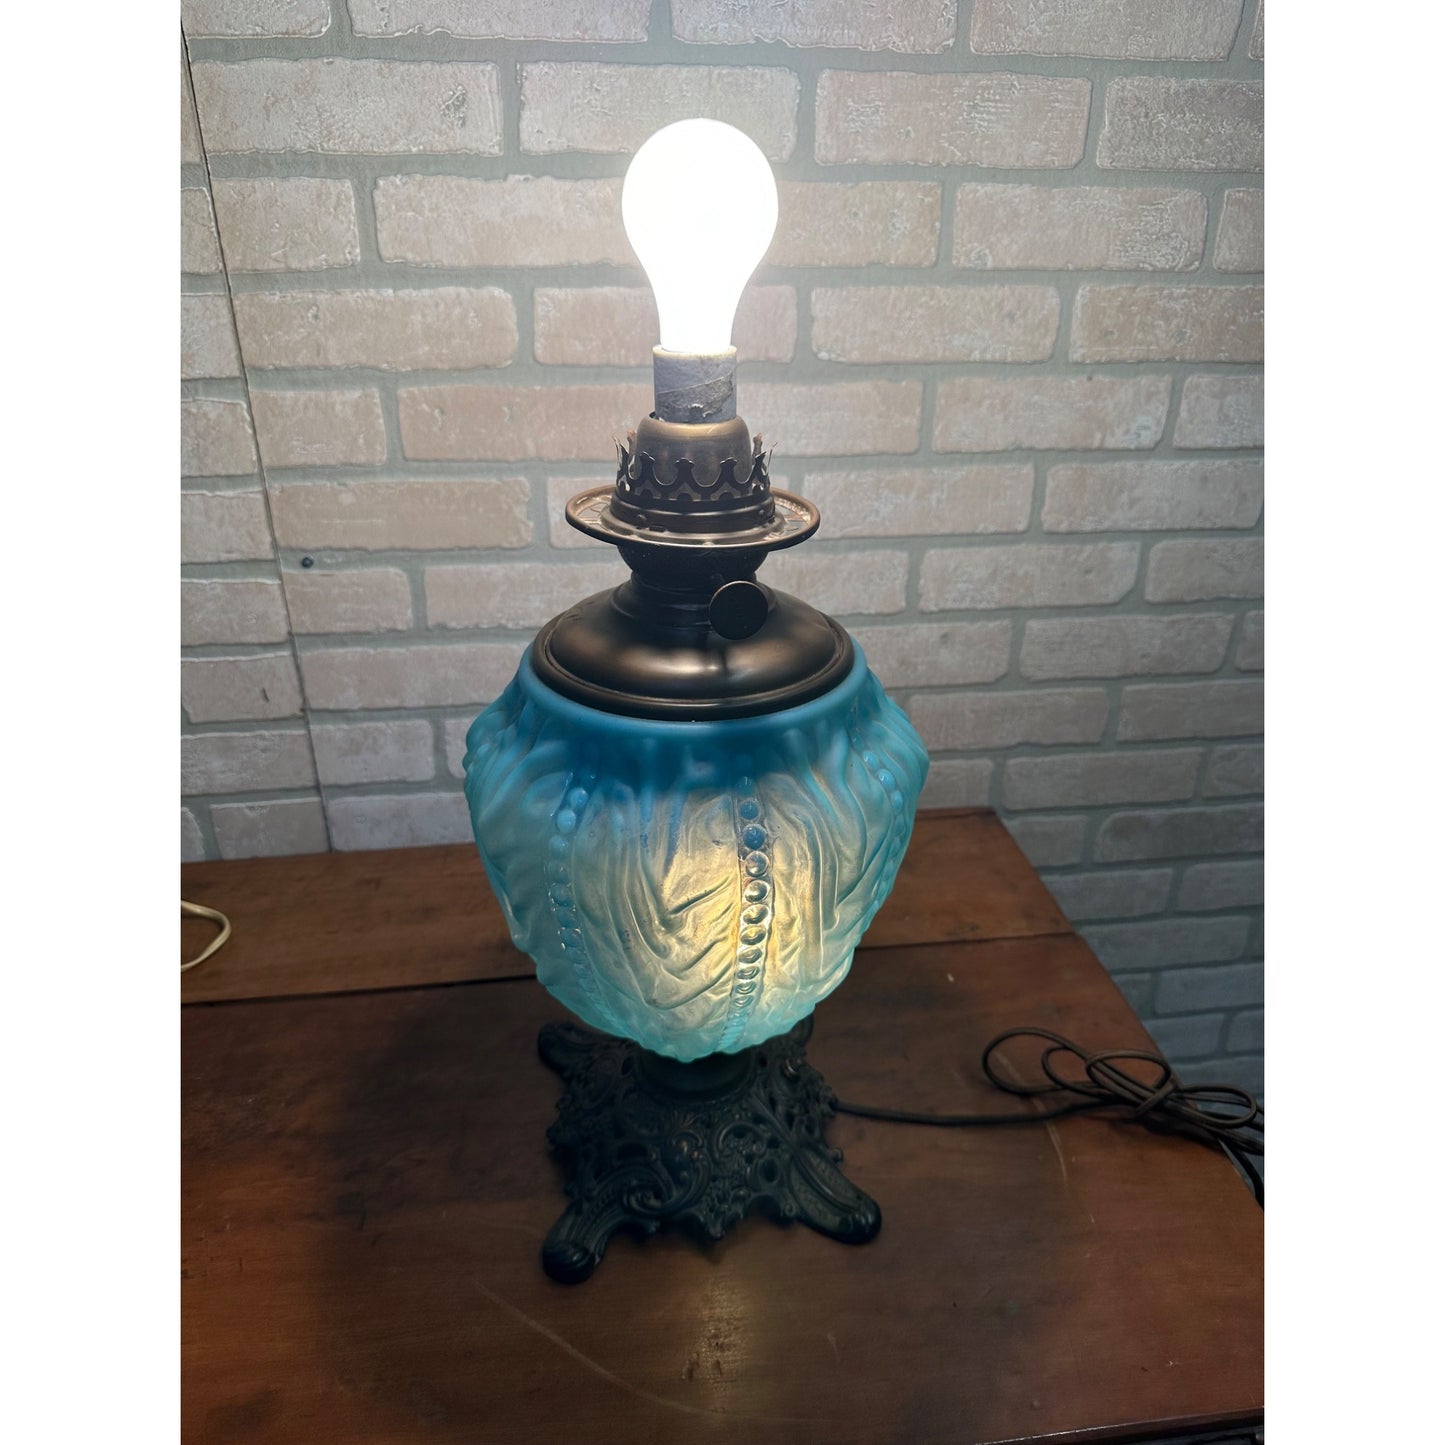 Antique Pittsburgh Lamp Co. Blue Satin Beaded Drape GWTW Oil Lamp Electrified